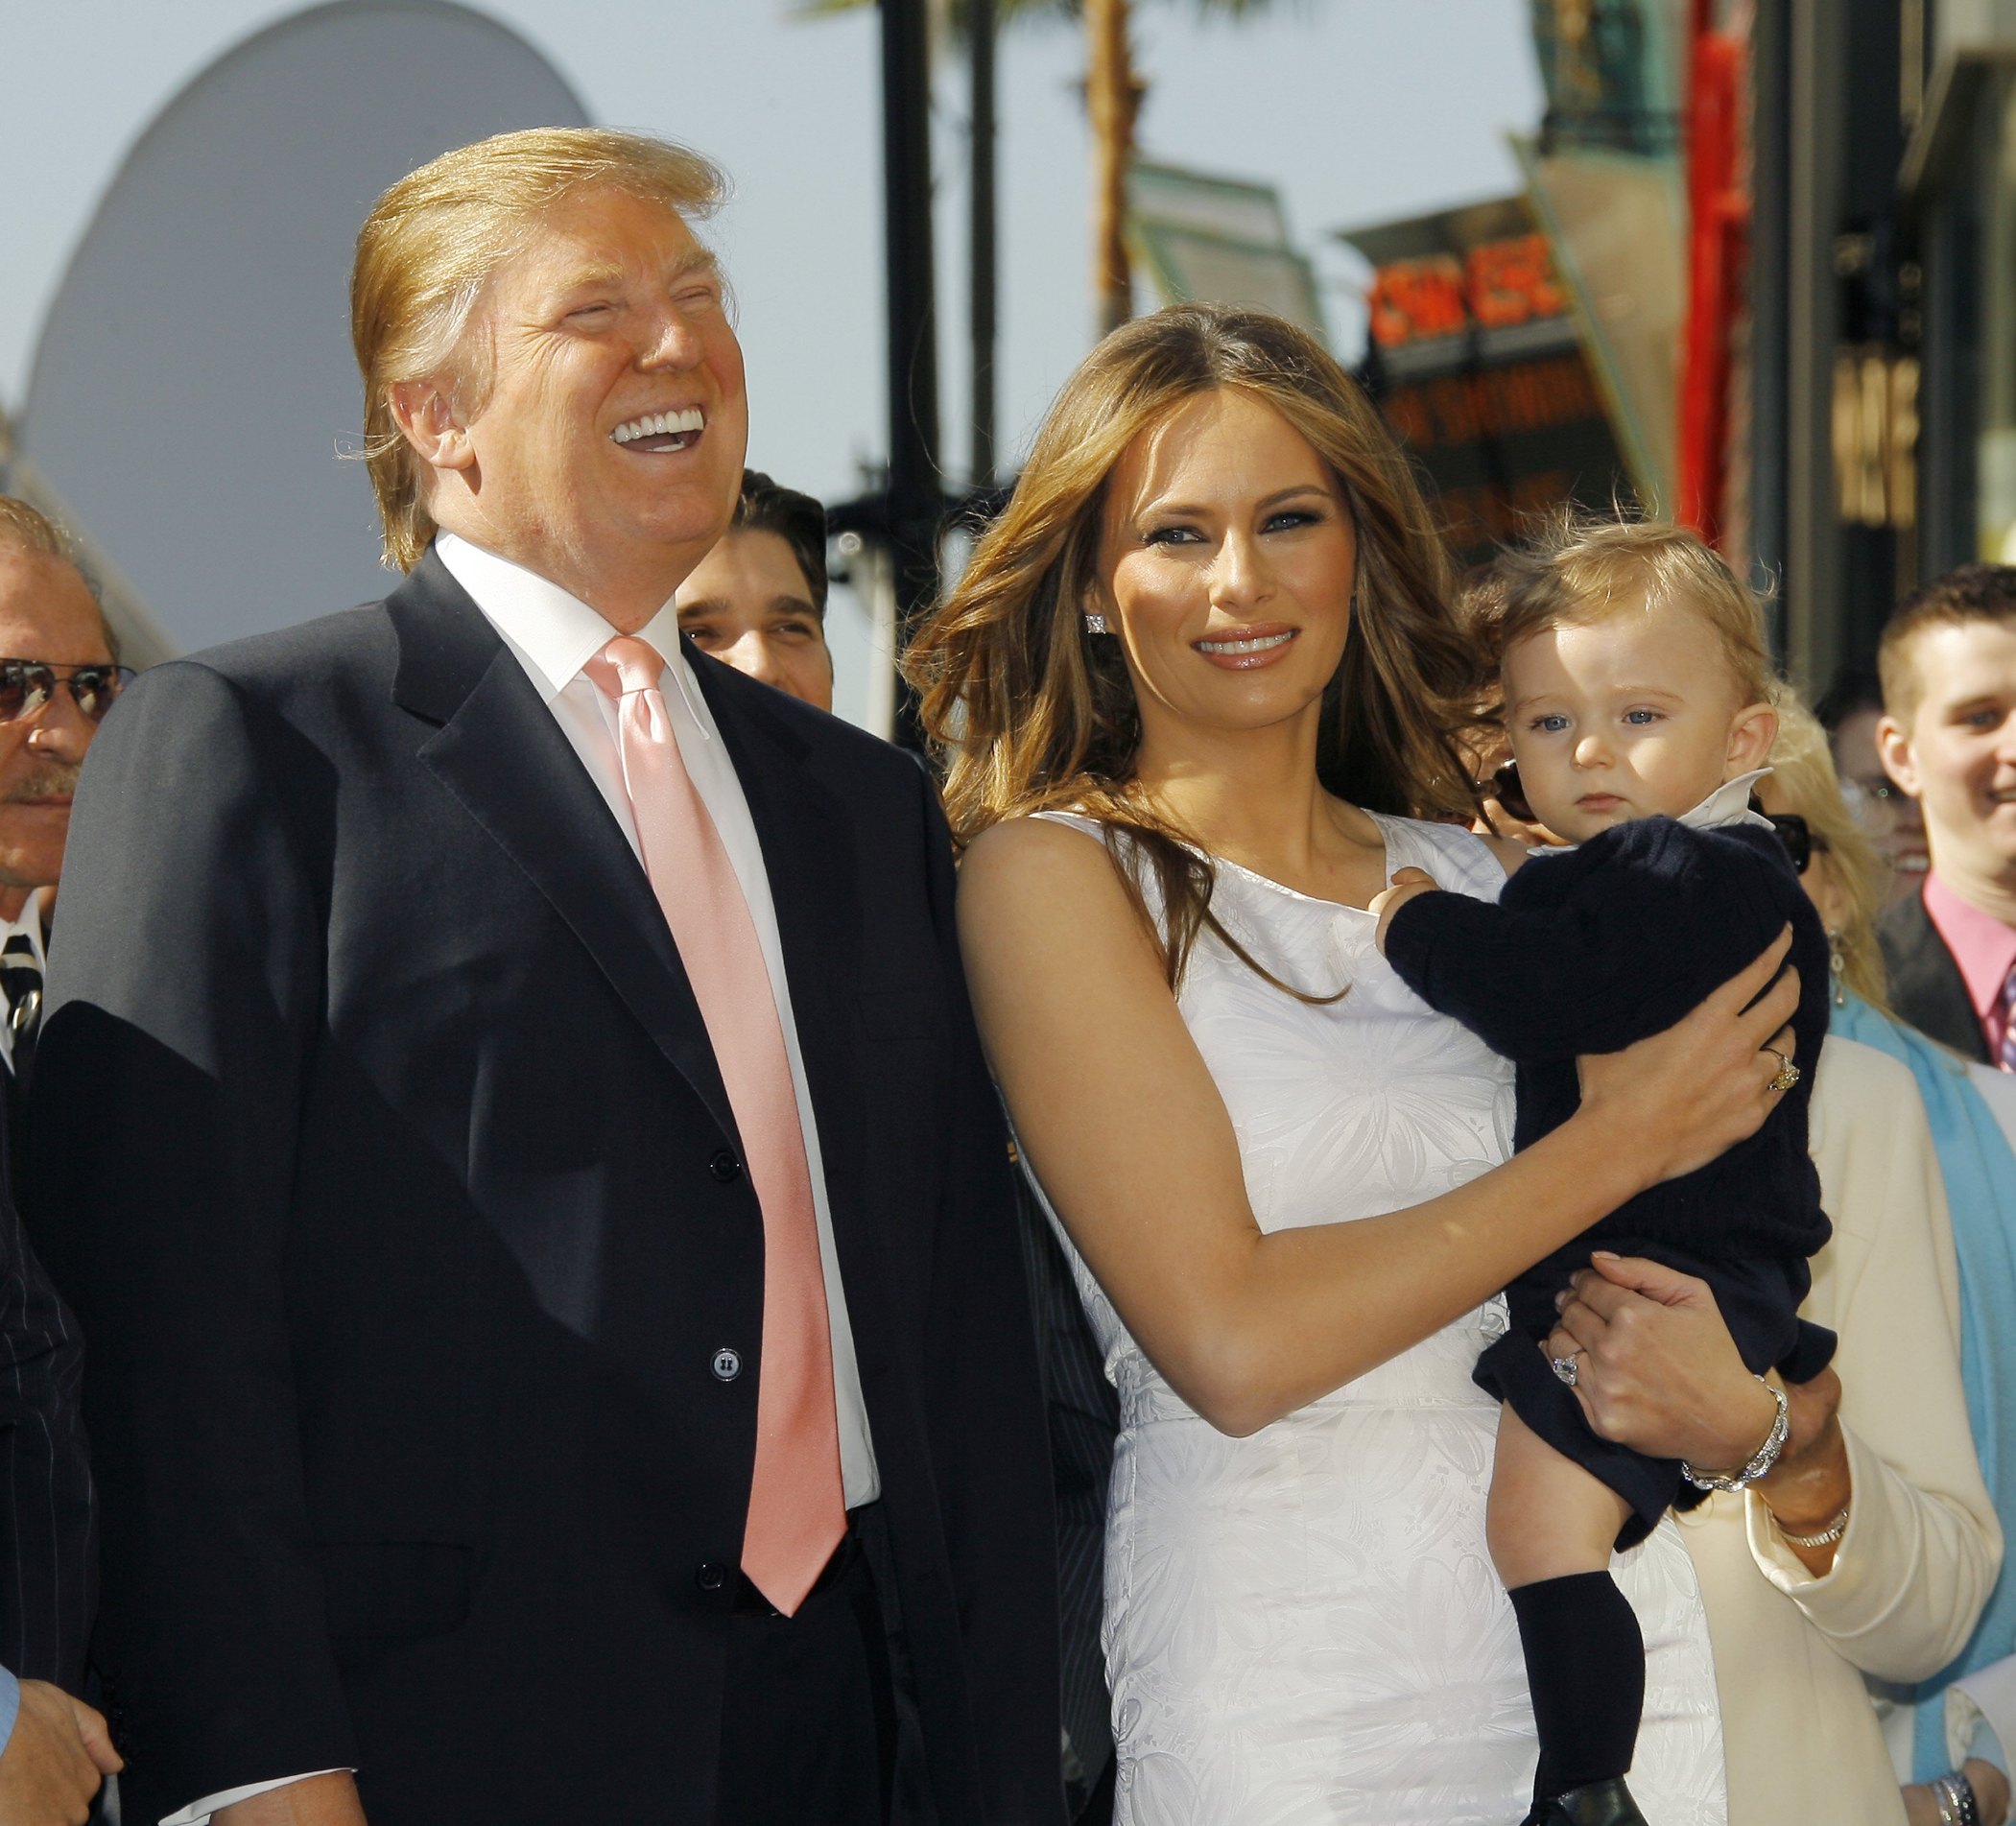 HOLLYWOOD, CA - JANIUARY 16:  Donald Trump (L) , wife Melania (C) and son Baron attend the ceremony honoring him with a star on the Hollywood Walk of Fame on January 16, 2006 in Hollywood, California. (Photo by Vince Bucci/Getty Images)